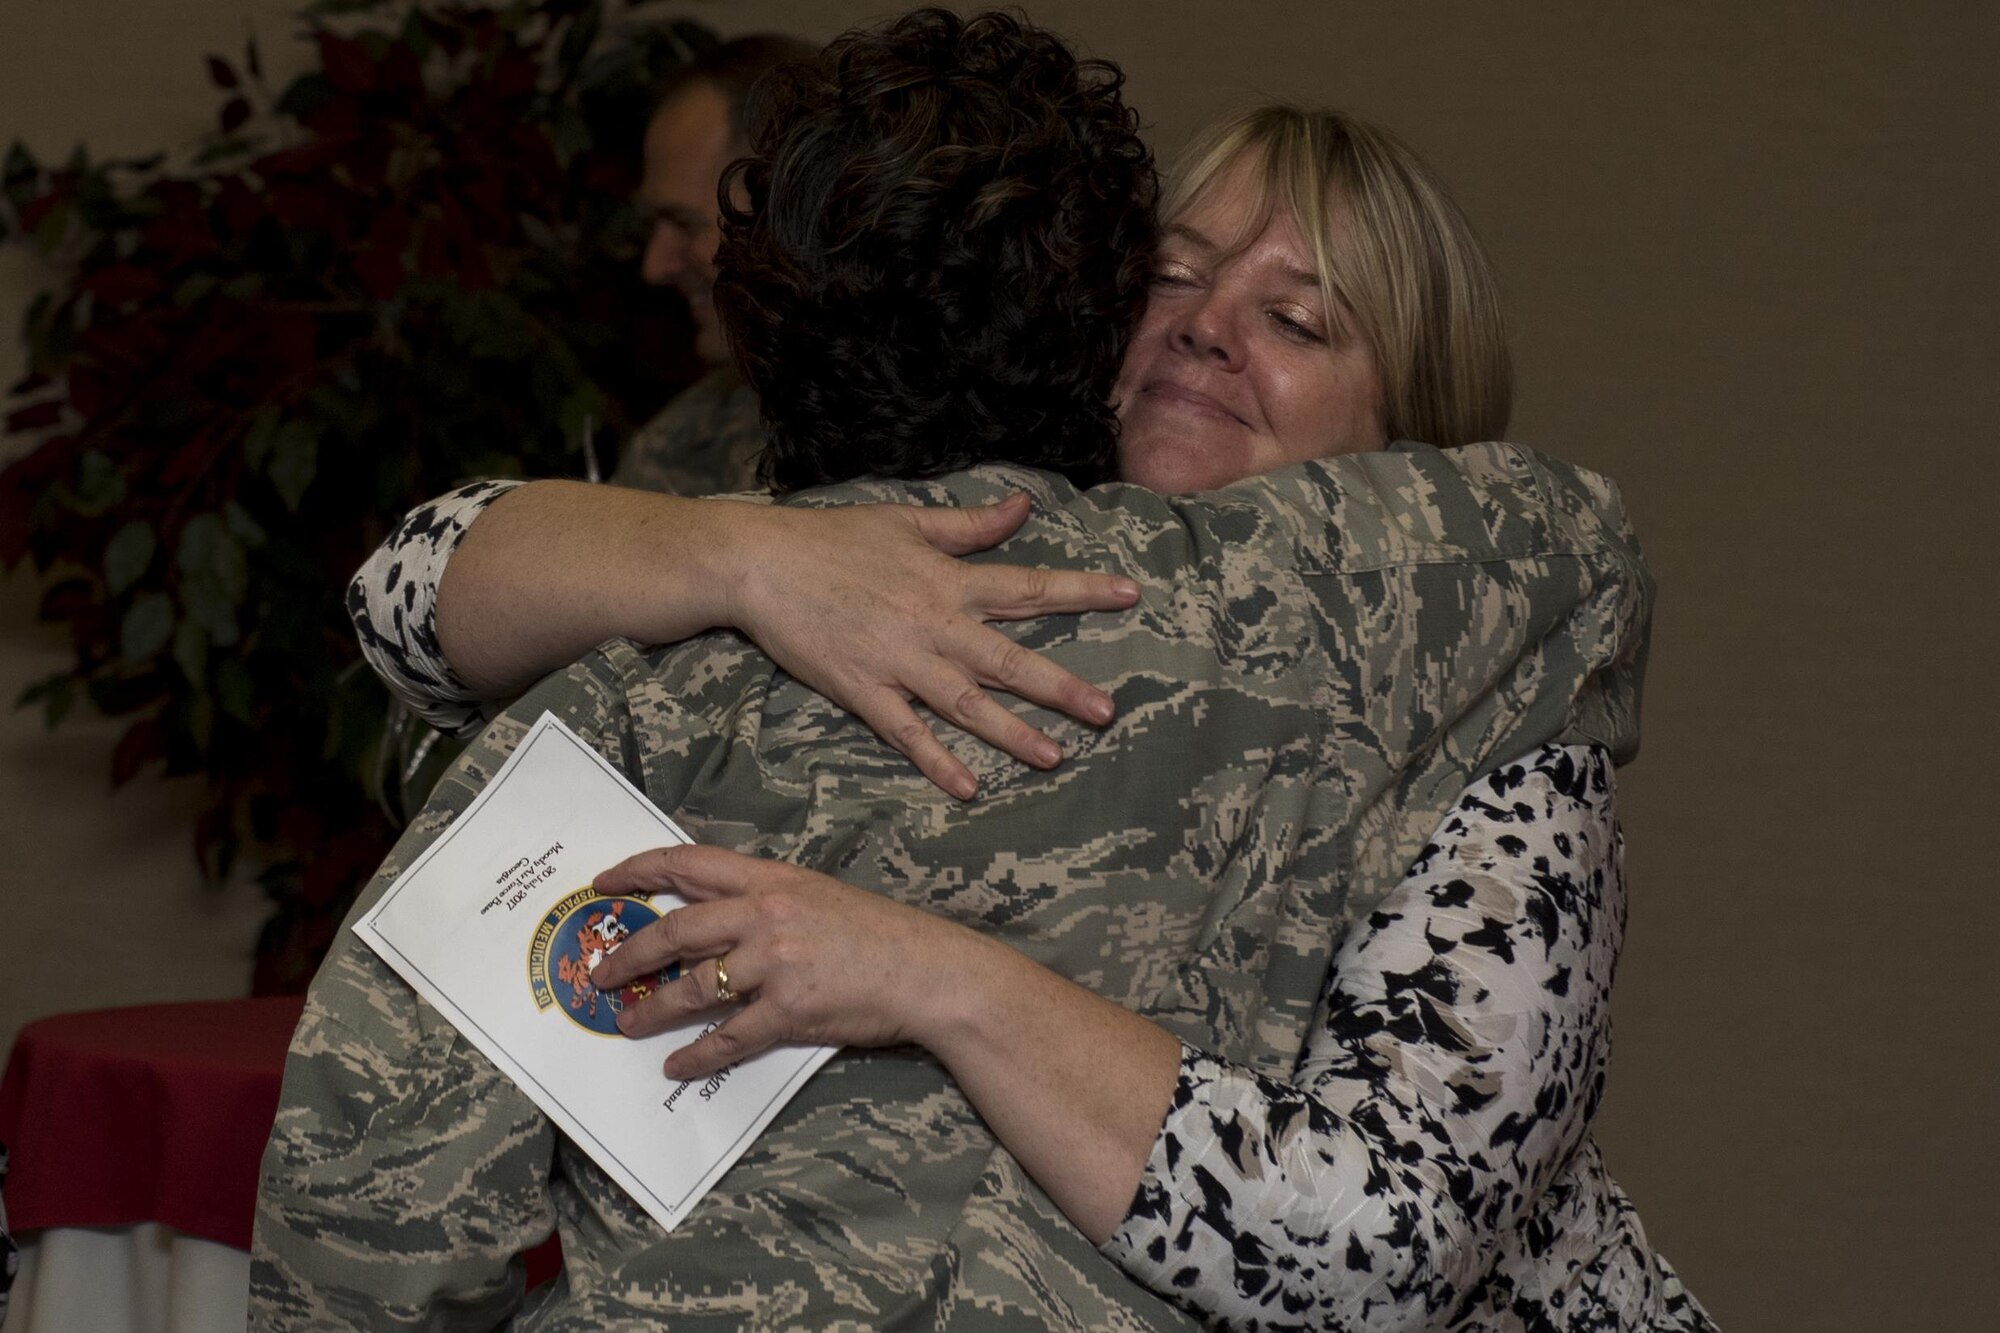 Col. Yvette Guzman, outgoing 23d Aerospace Medicine Squadron Commander, receives an embrace, July 20, 2017, at Moody Air Force Base, Ga. Guzman’s next assignment will be at Kirkland AFB, New Mexico, where she will serve as the Chief of the Inspection and Training Division. (U.S. Air Force photo by Airman 1st Class Destiney Masse)